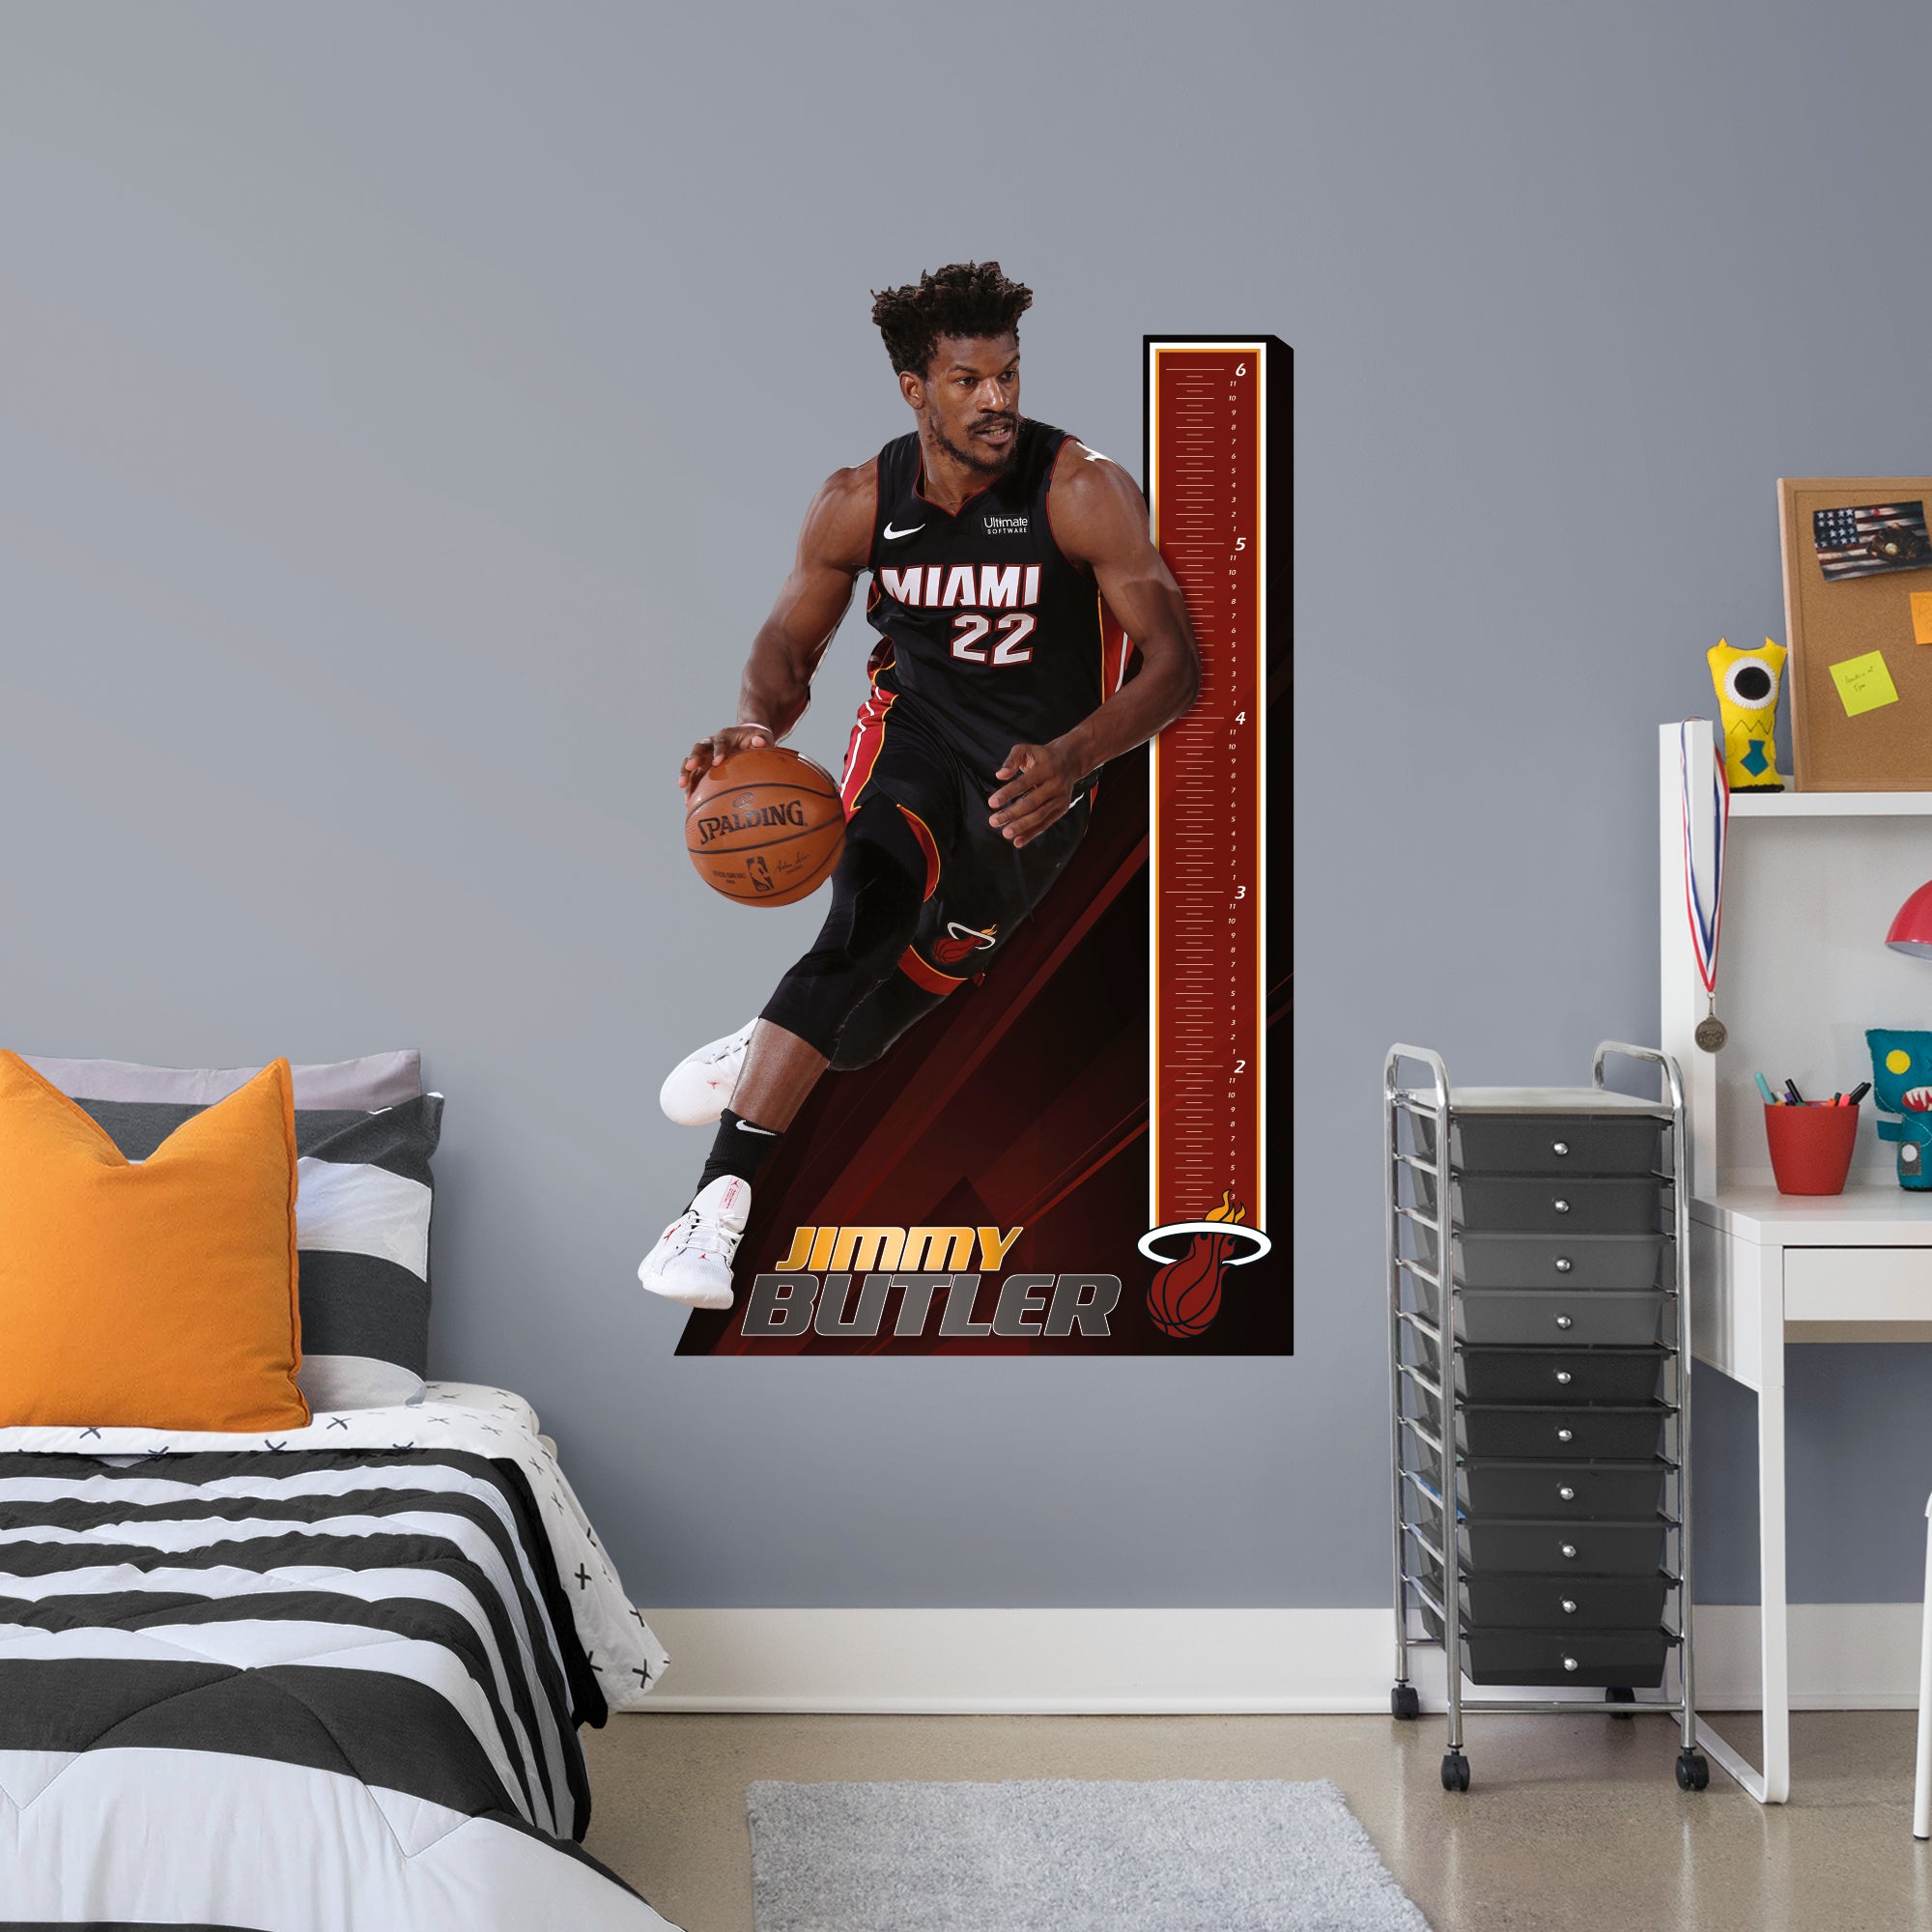 Jimmy Butler 2020 Growth Chart - Officially Licensed NBA Removable Wall Decal Growth Chart (75.5"W x 45"H) by Fathead | Vinyl